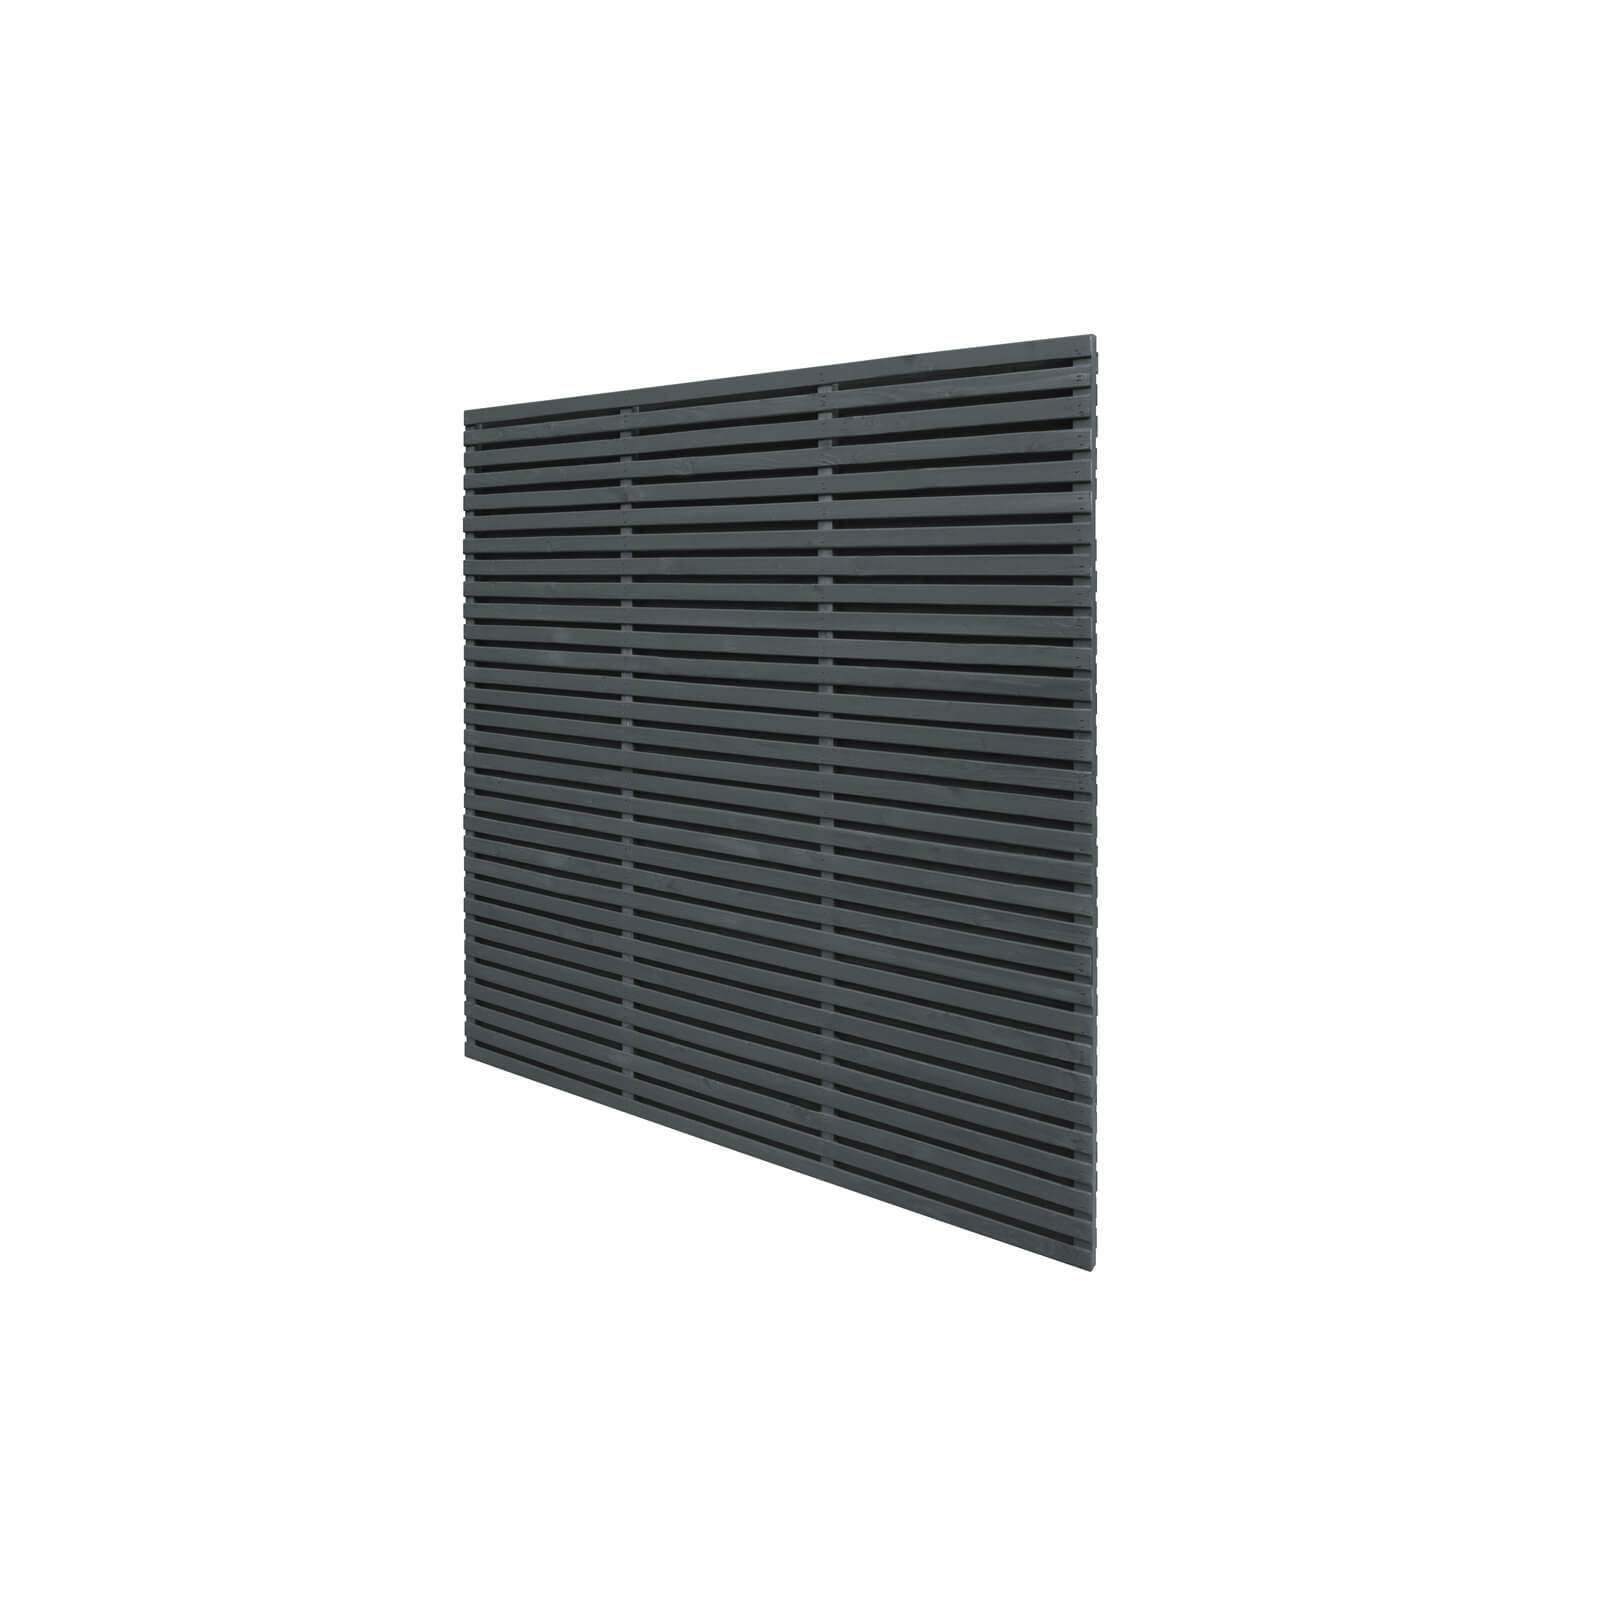 6ft x 6ft (1.8m x 1.8m) Grey Painted Contemporary Double Slatted Fence Panel - Pack of 3